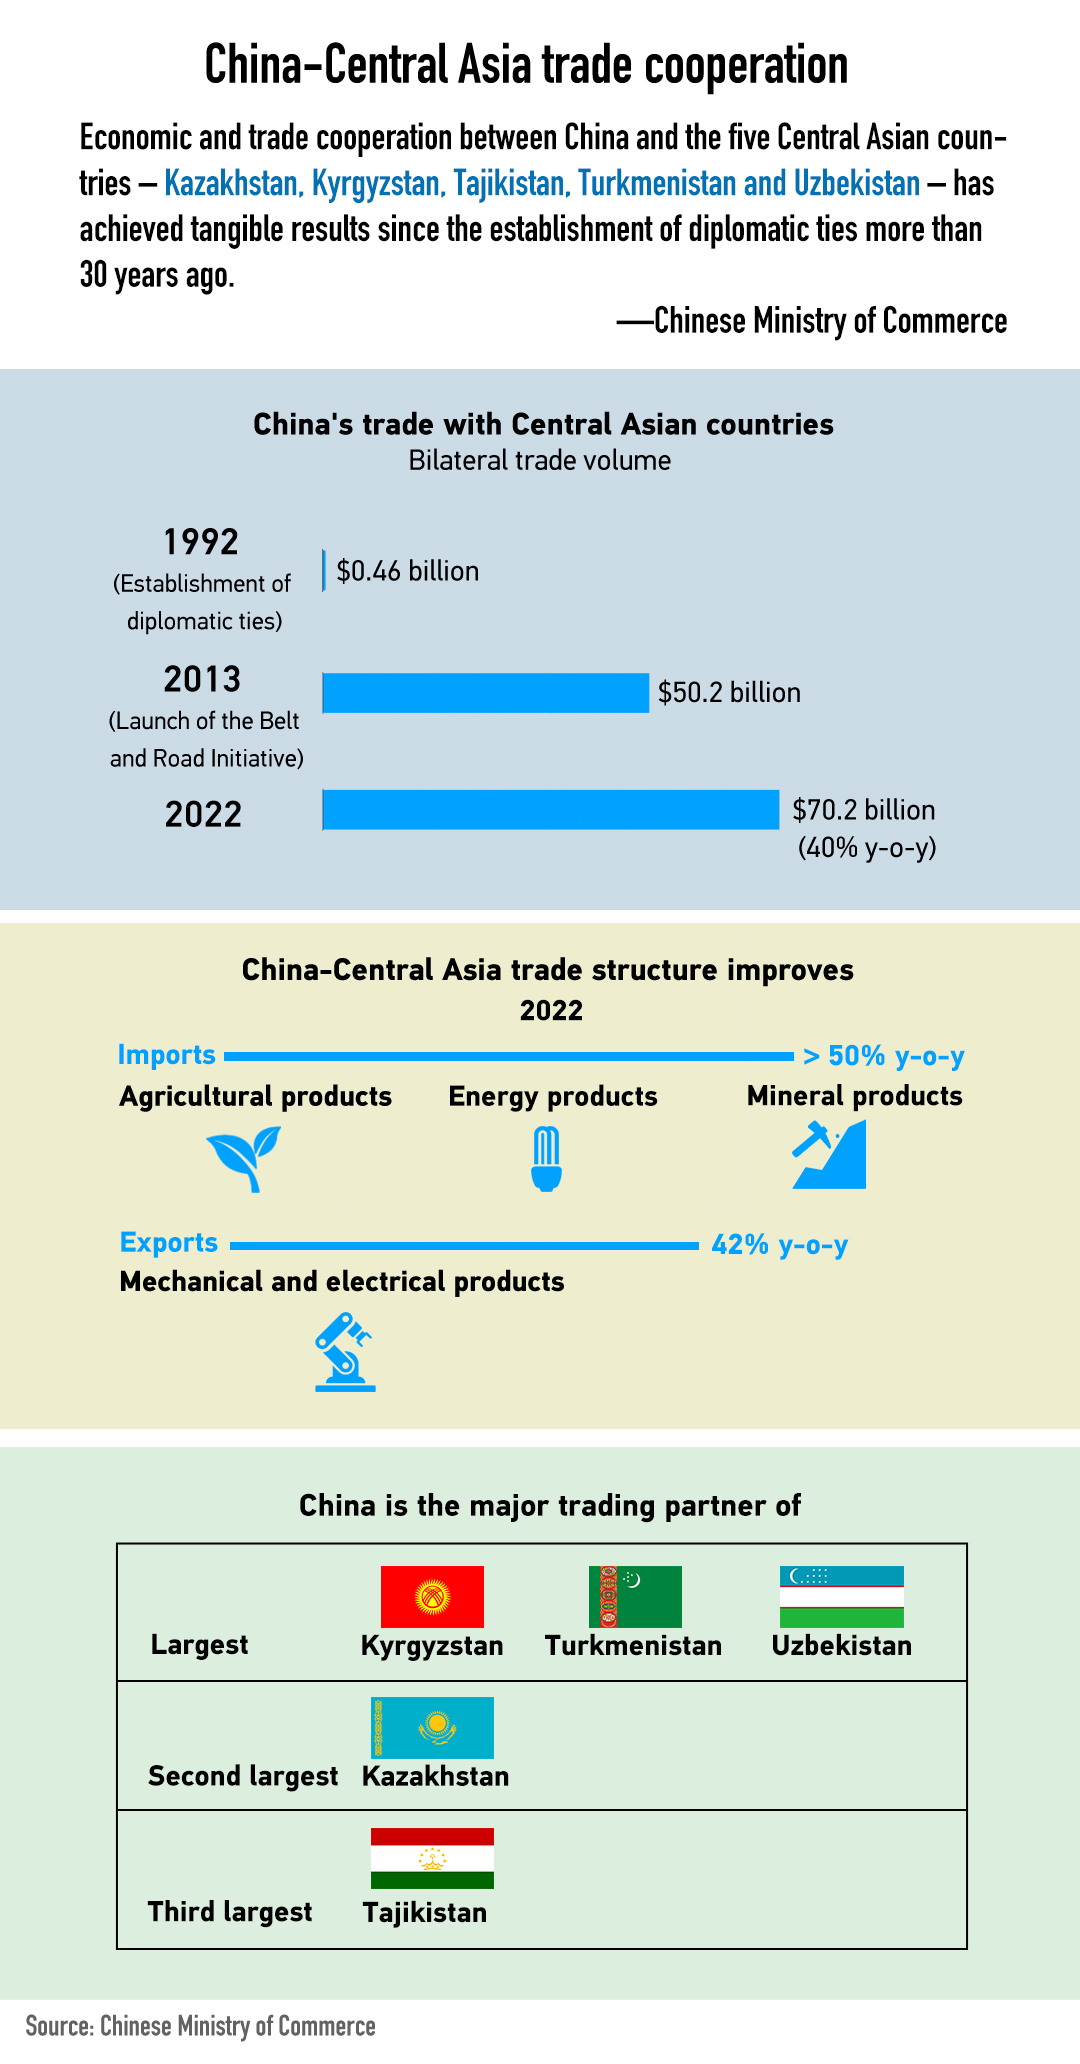 Chart of the Day: China-Central Asia economic and trade cooperation achieves tangible results